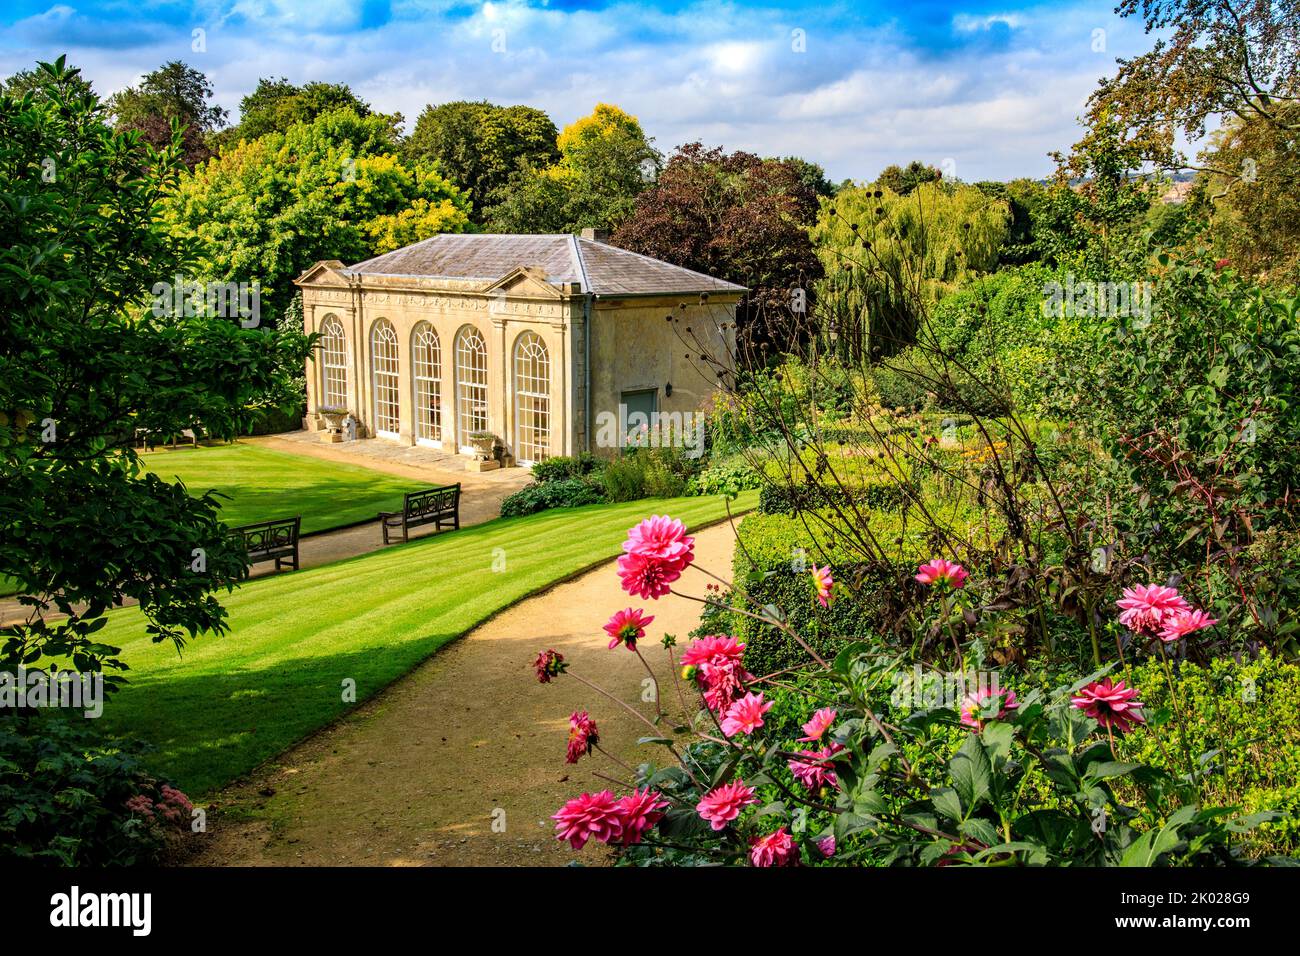 The orangery in the landscaped grounds of Sherborne Castle, Dorset, England, UK Stock Photo